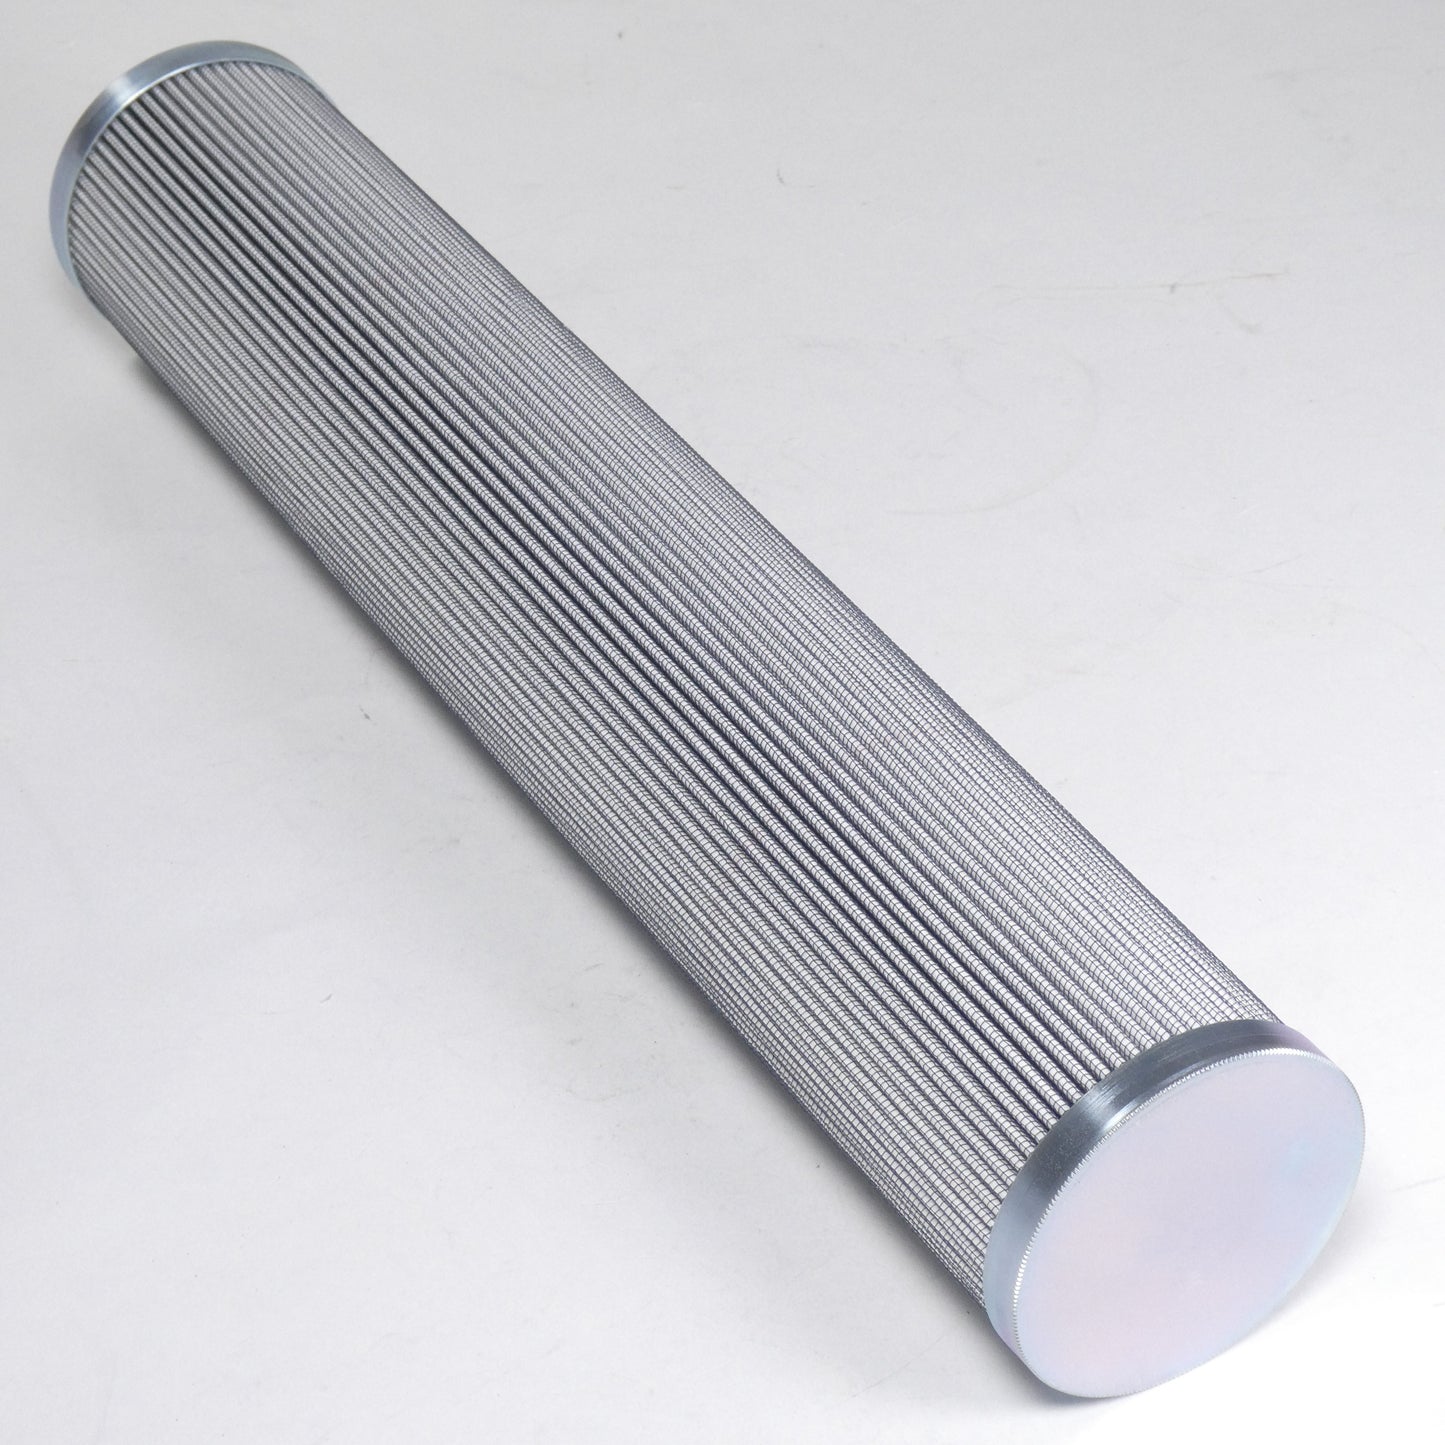 Hydrafil Replacement Filter Element for Pall HC9601ENK16Z